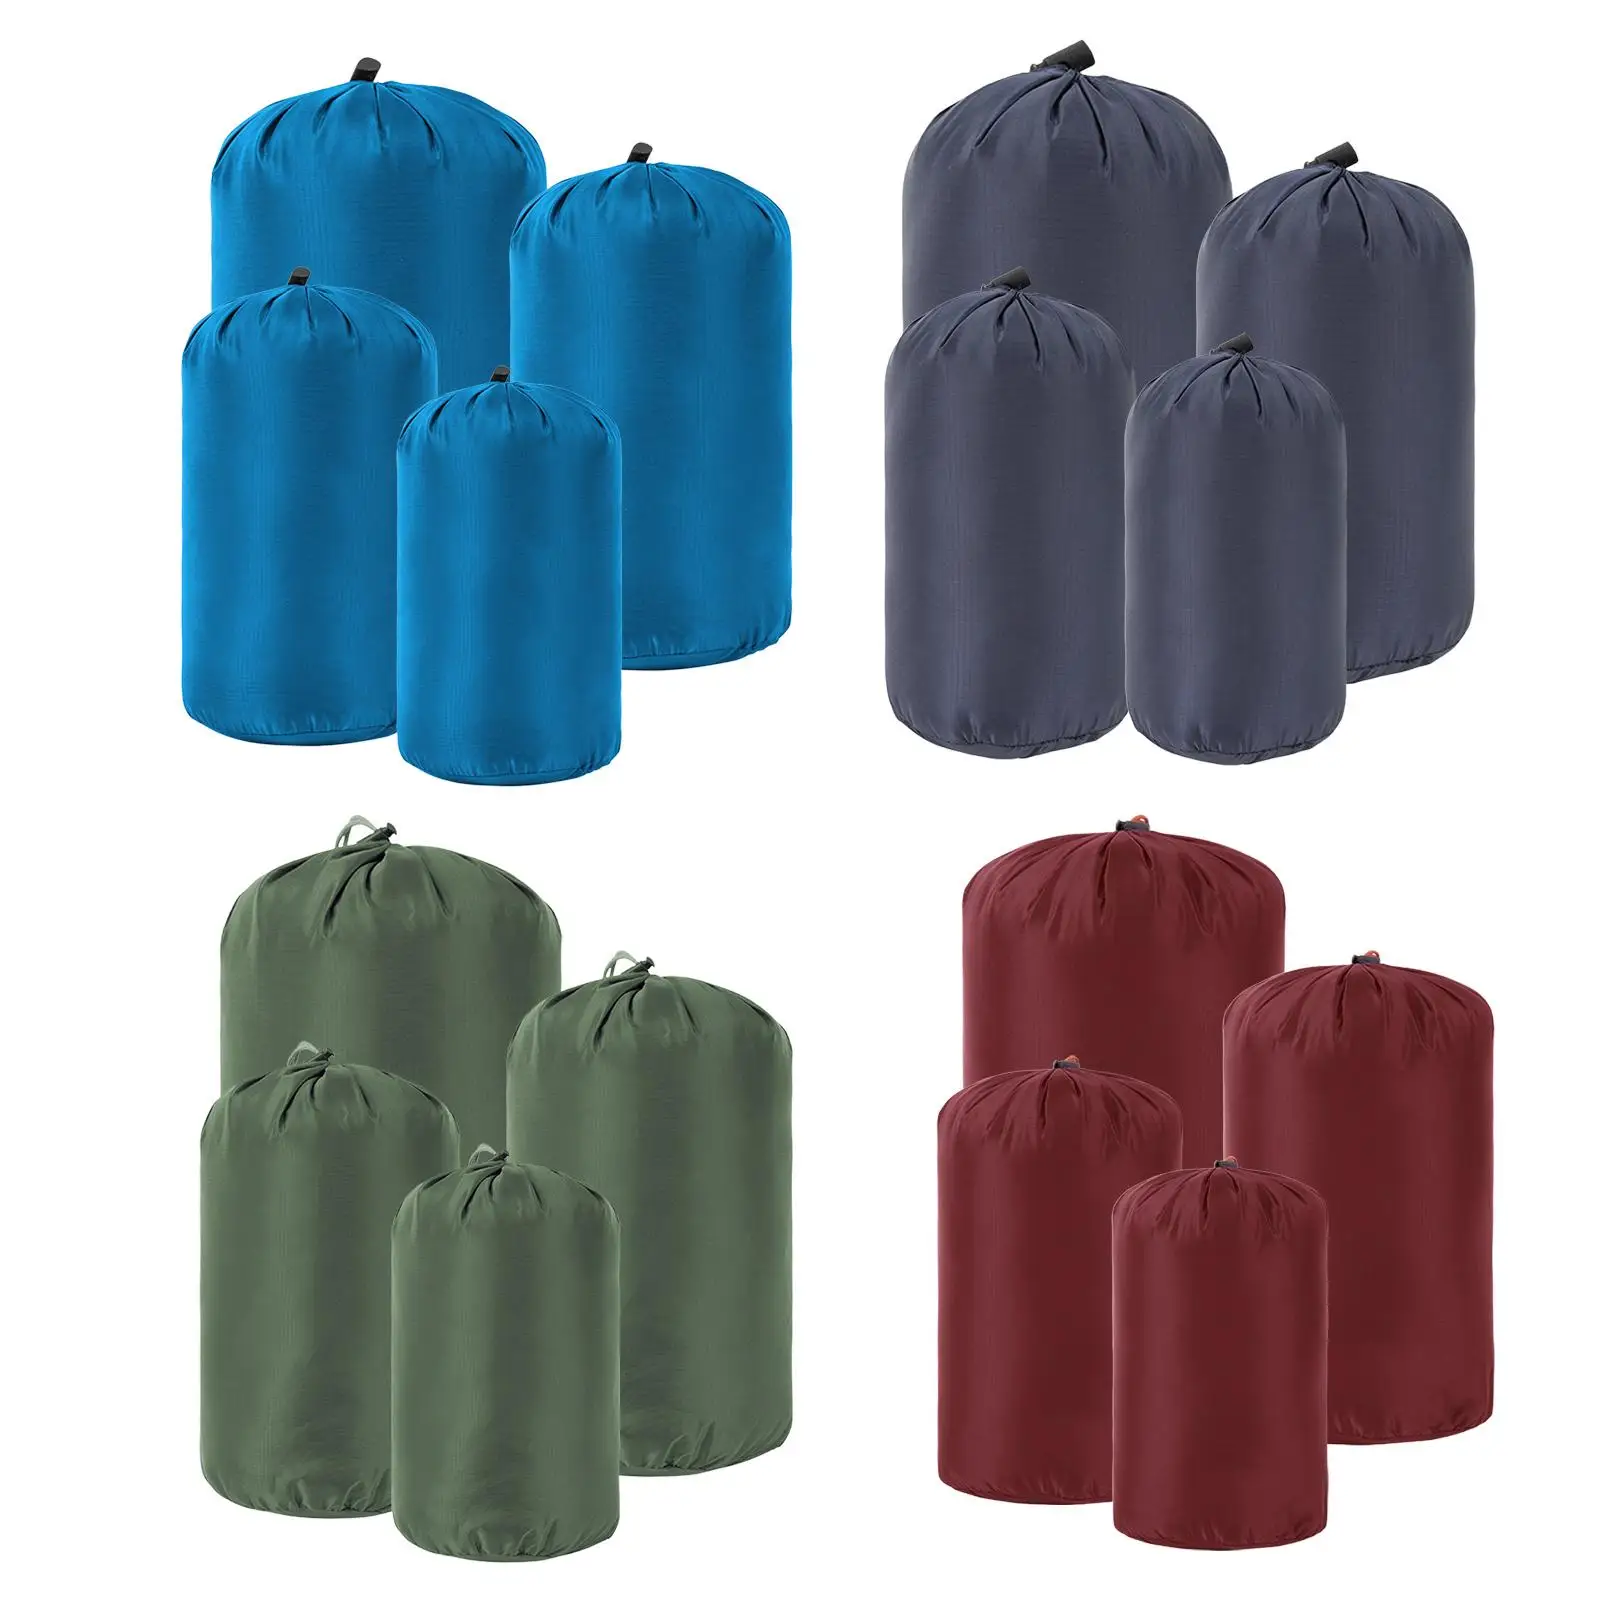 4x Compression Stuff Sack Practical Packing Bag Carry Water Resistant Nylon